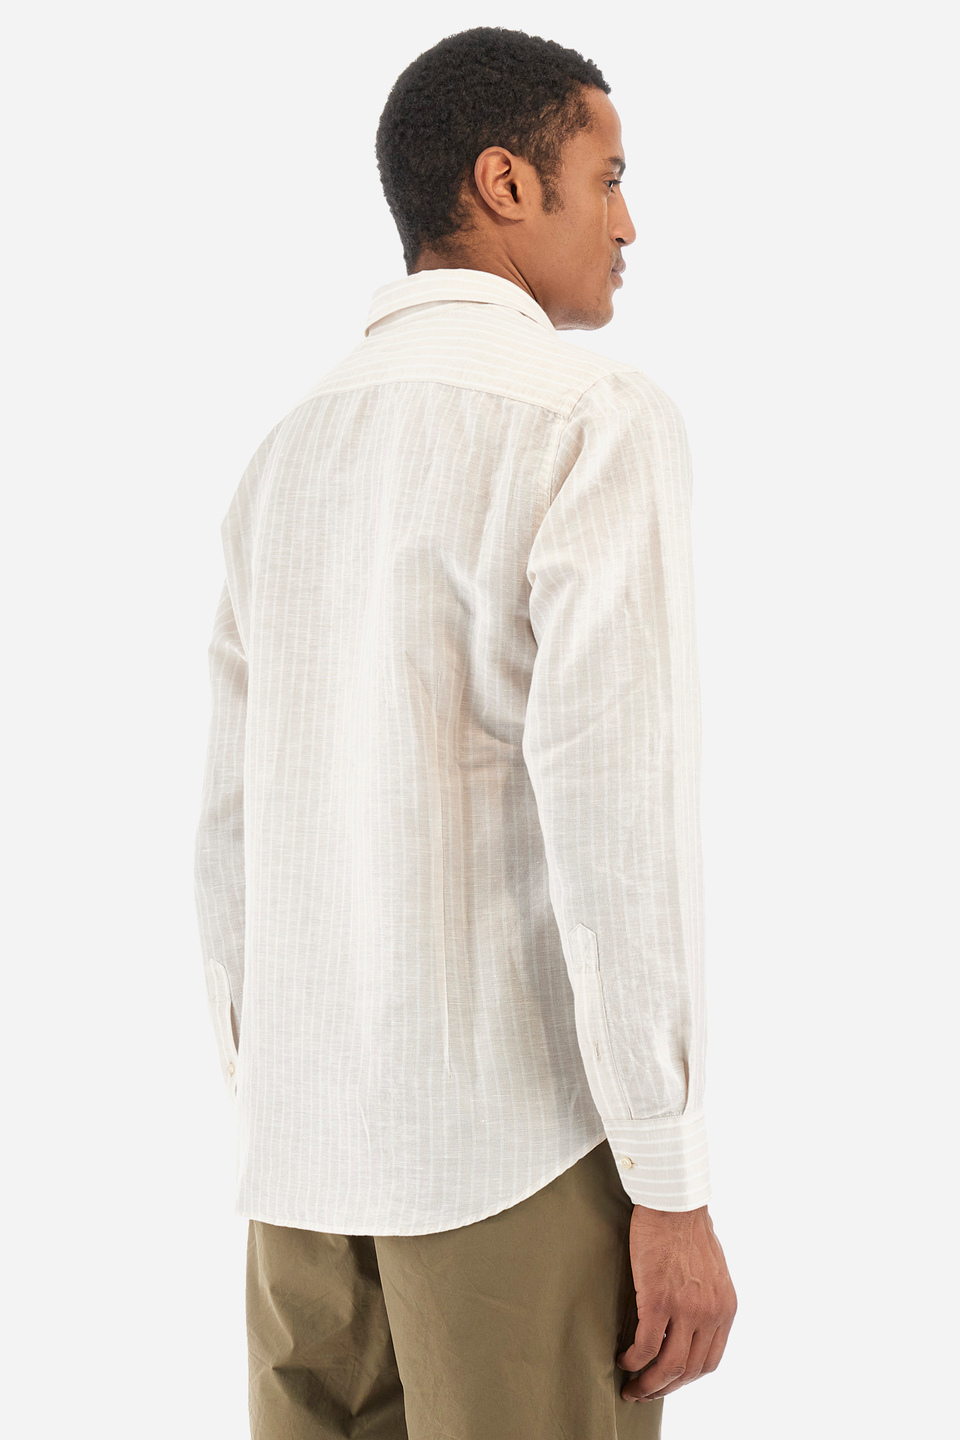 Striped patterned shirt in cotton and linen - Innocent | La Martina - Official Online Shop